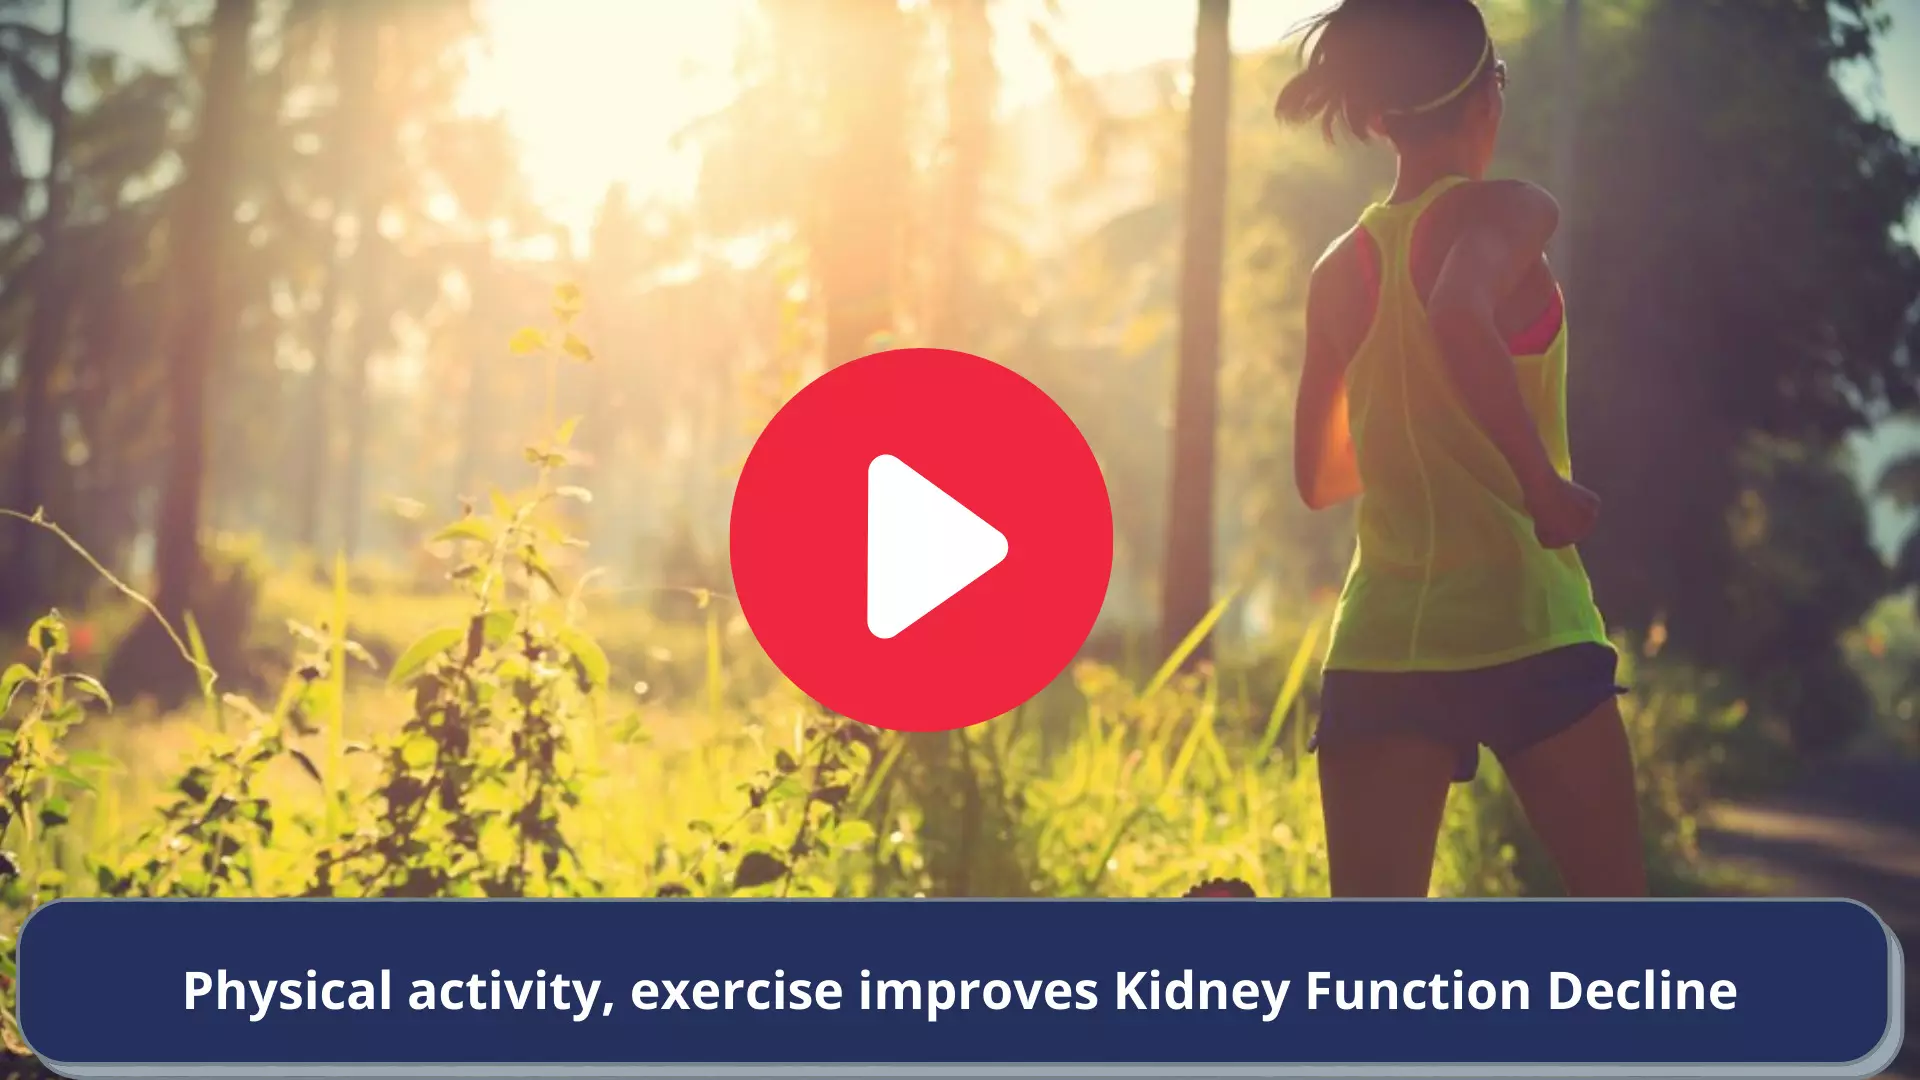 Physical activity, exercise improves Kidney Function Decline